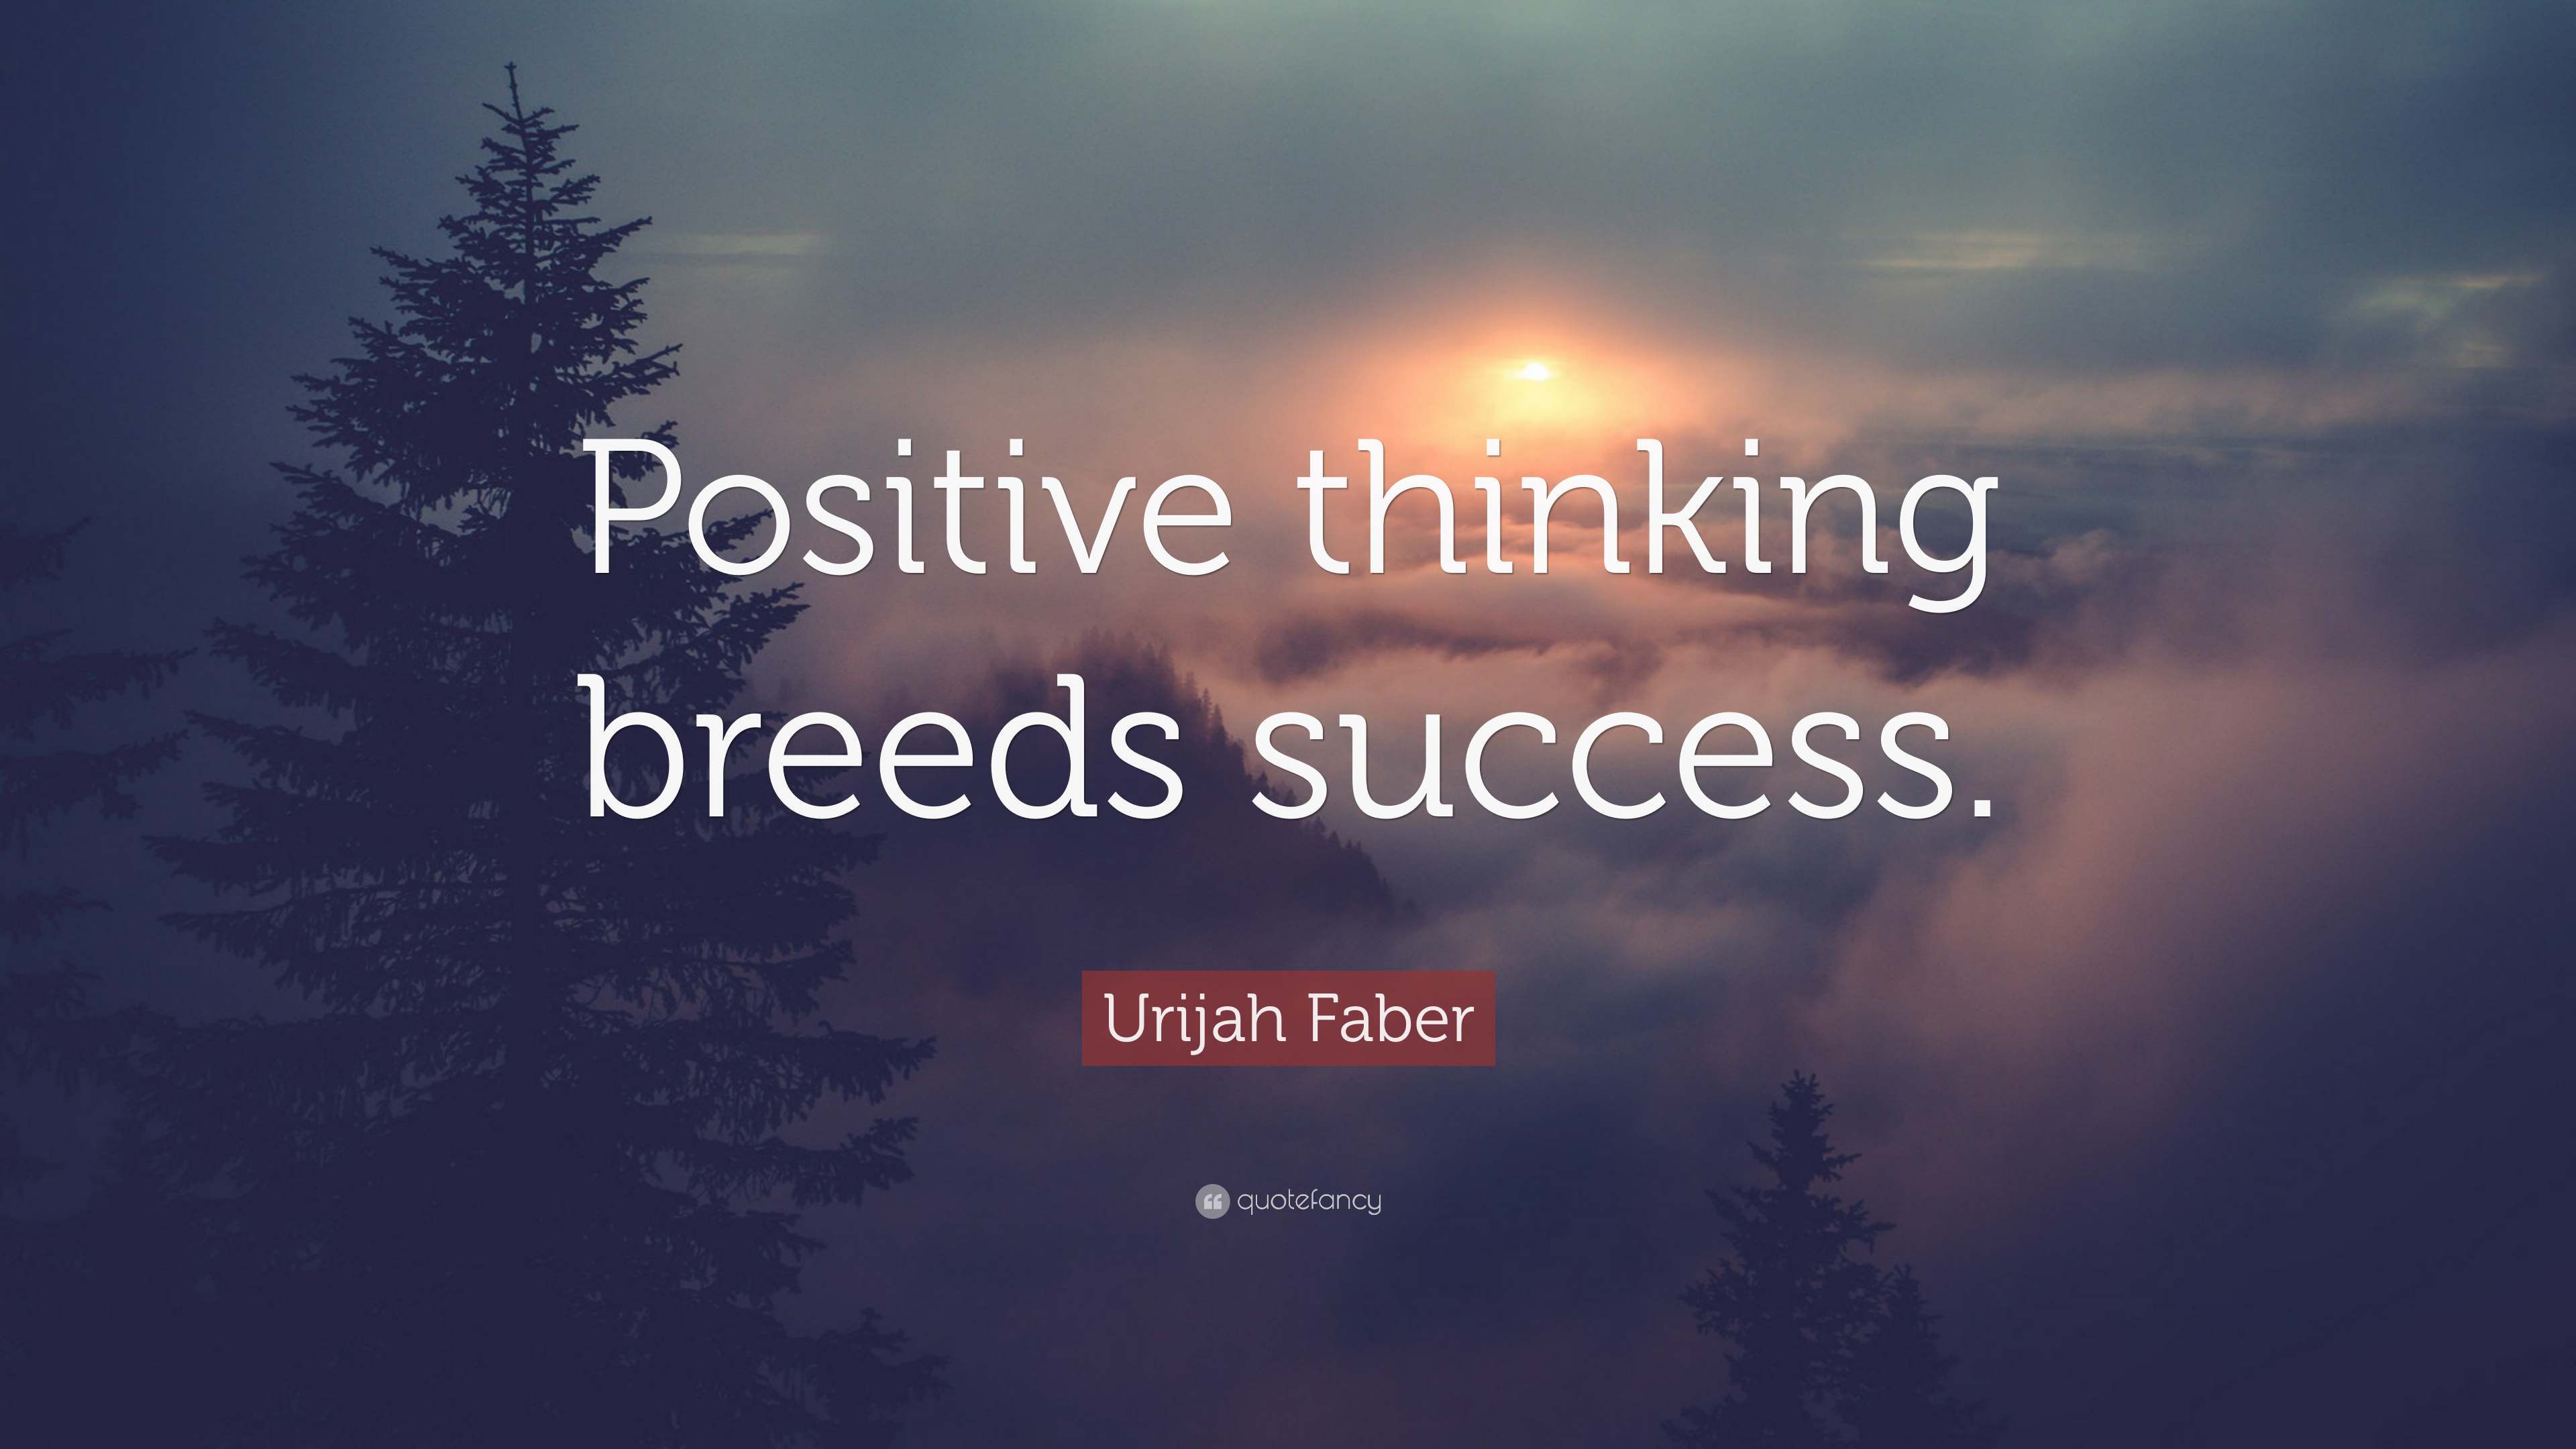 Urijah Faber Quote: “Positive thinking breeds success.” 9